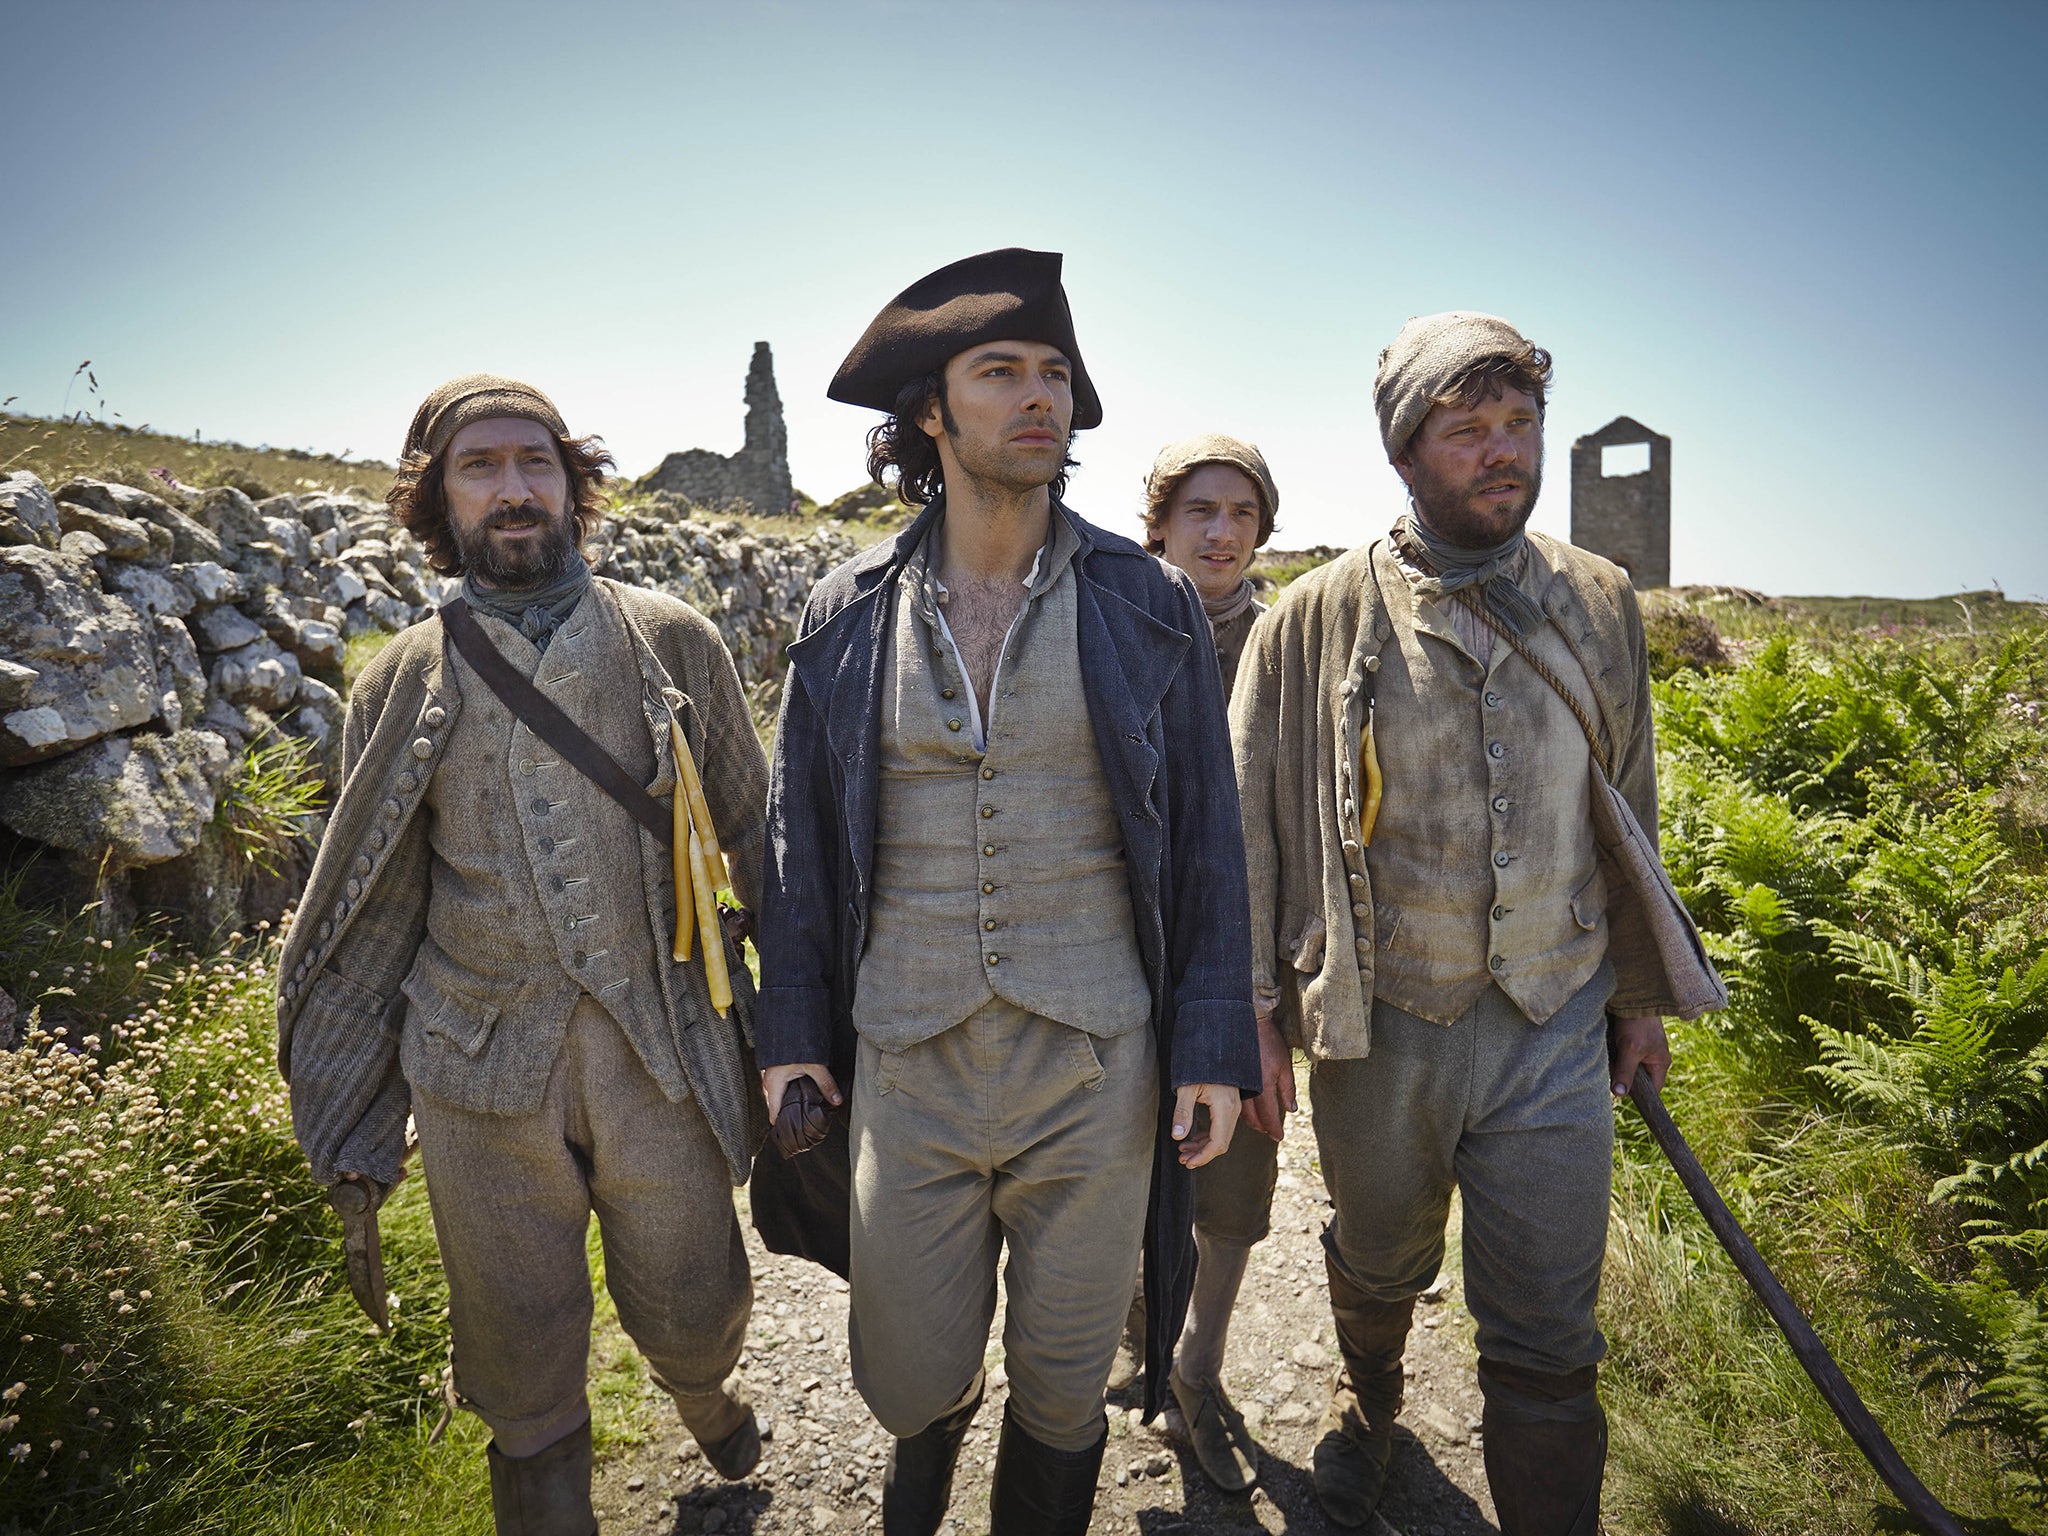 Proving his metal: Ross Poldark (played by Aidan Turner in the BBC series) epitomises the risk-taking spirit of 18th-century mine owners